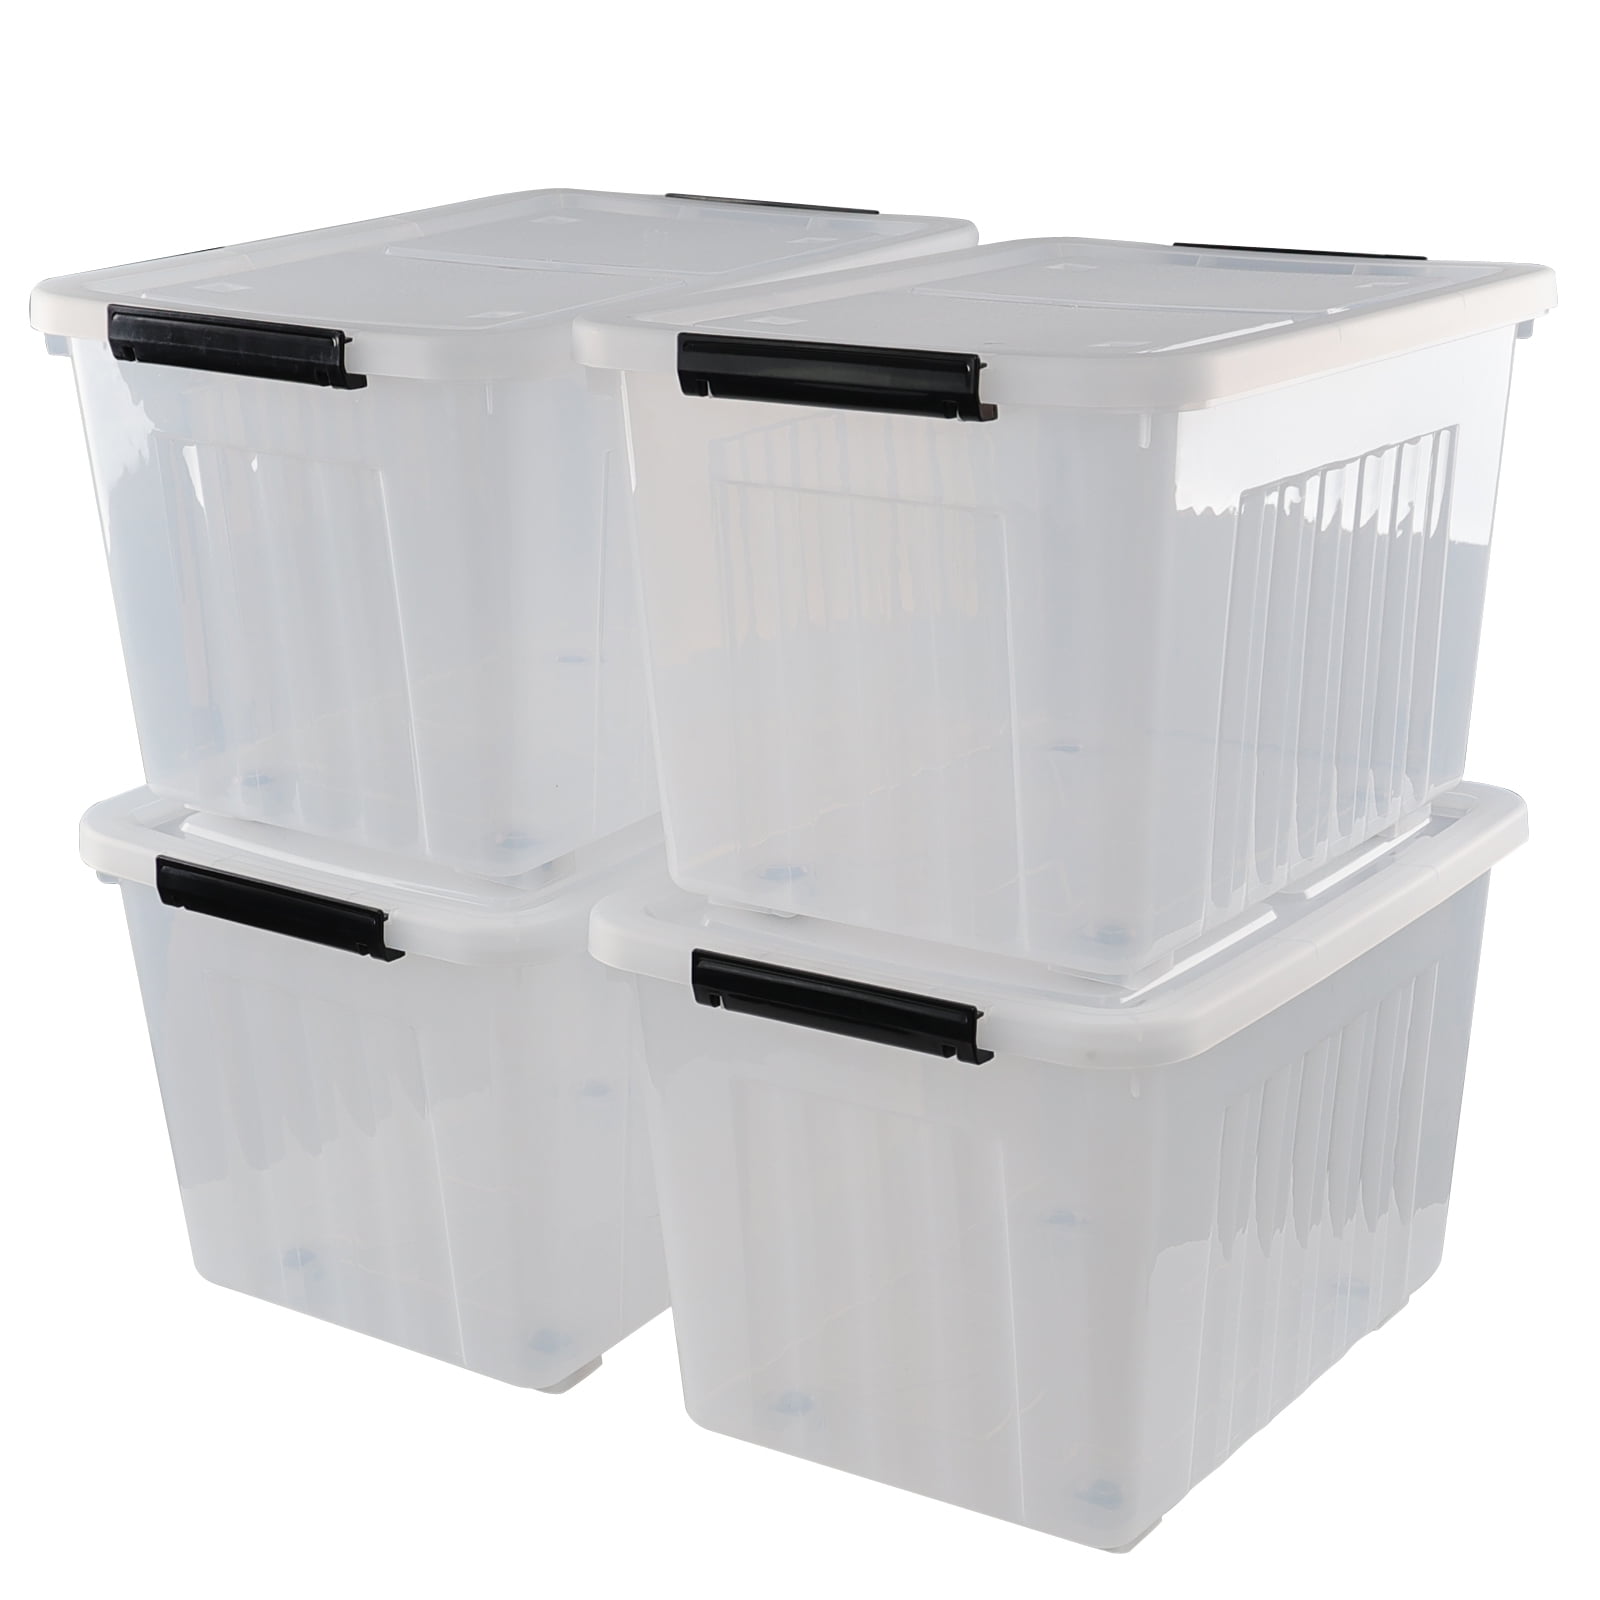 ReadySpace Extra Large Plastic Containers for Organizing and Storage Bins  for Closet, Kitchen, Office, or Pantry Organization, 14.75-Inch x 16.5-Inch